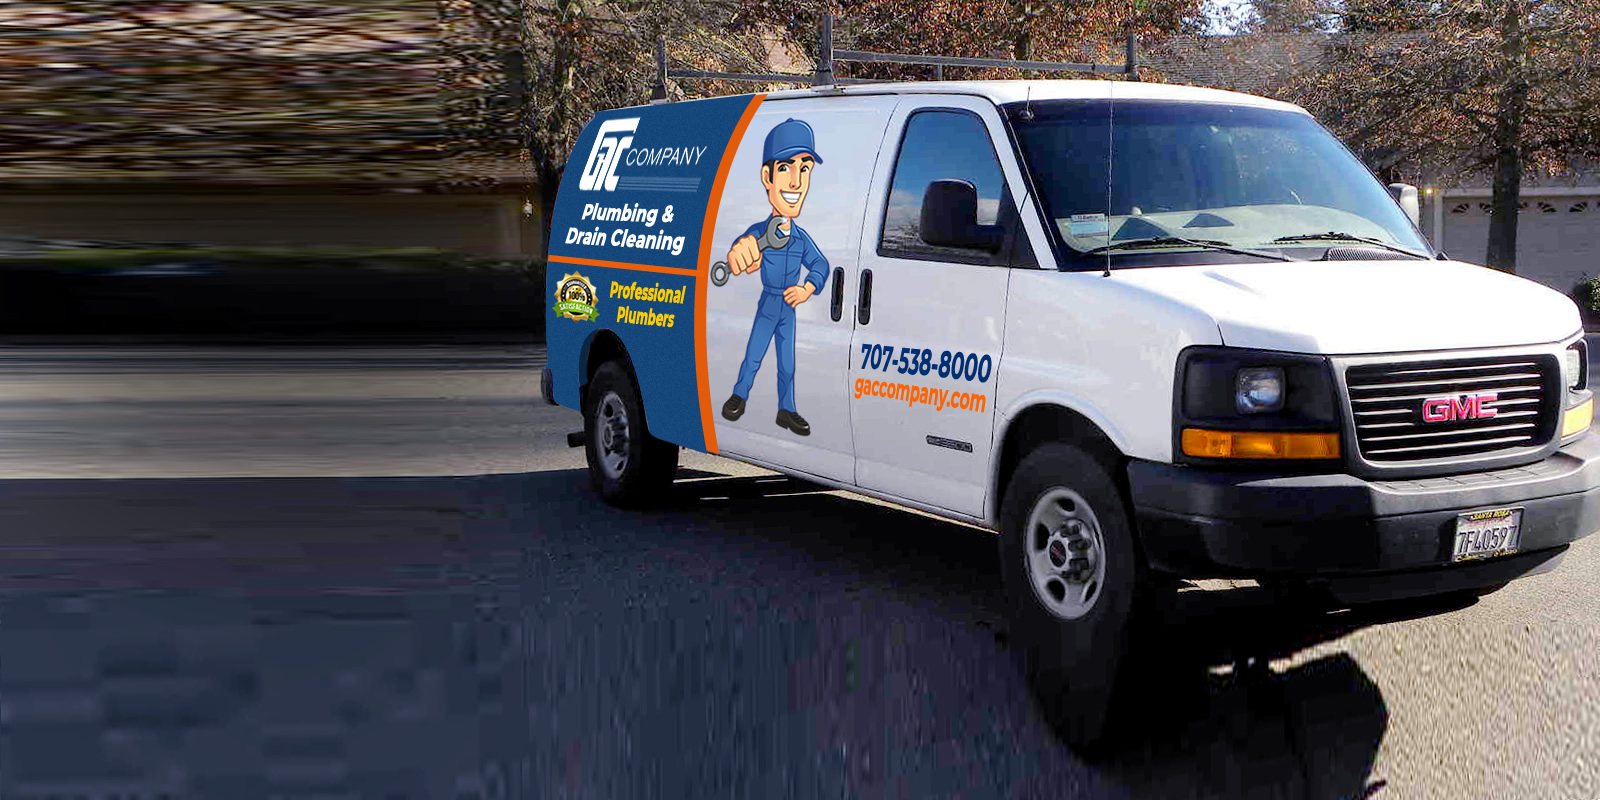 Best Plumbing & Drain Cleaning Services in Sonta Rosa